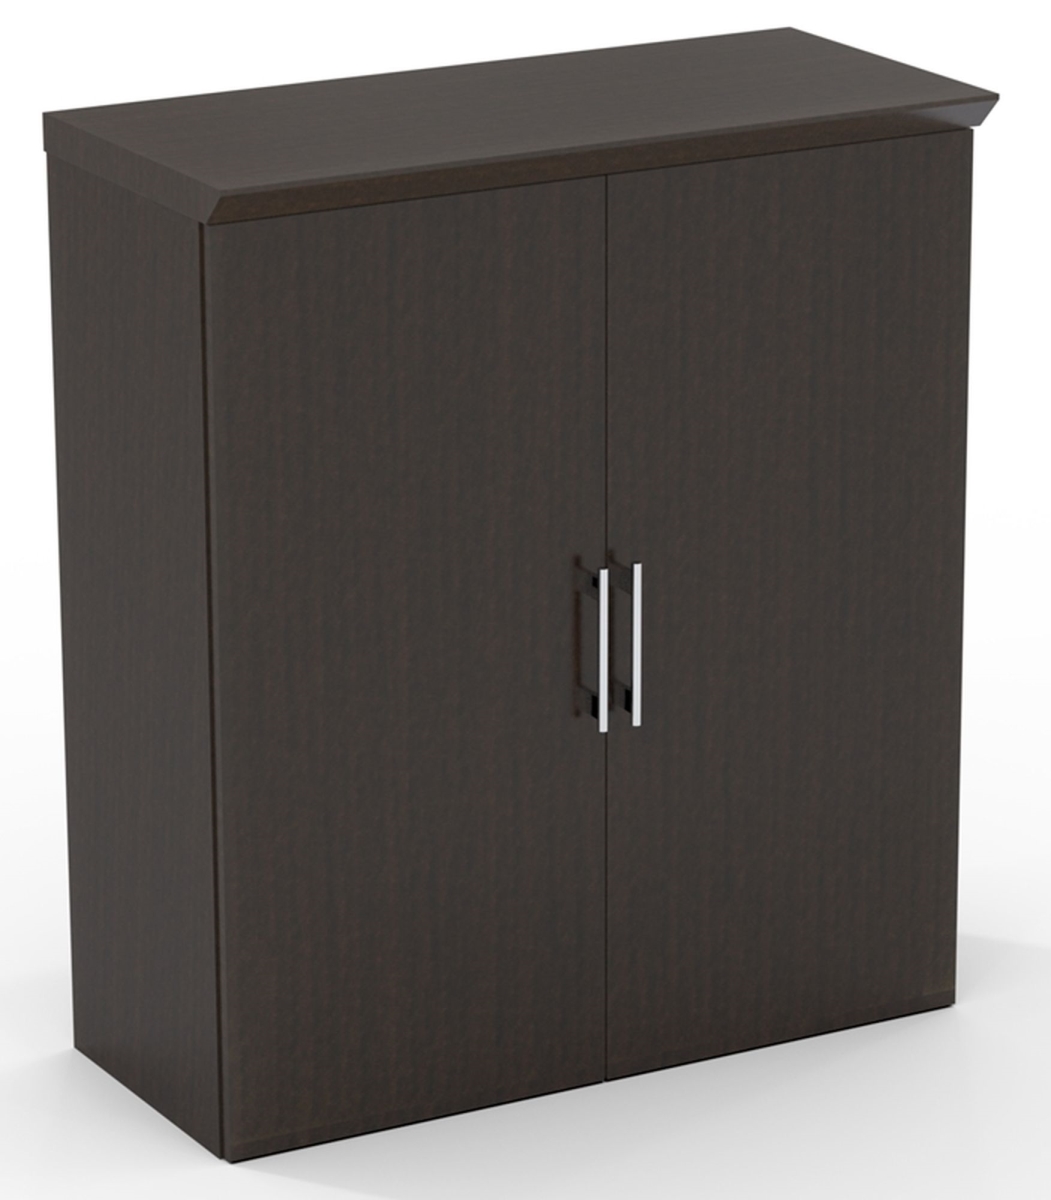 Stscwdtdc Sterling Storage Cabinet With Wood Doors - Textured Mocha - 41.62 X 36 X 16.5 In.